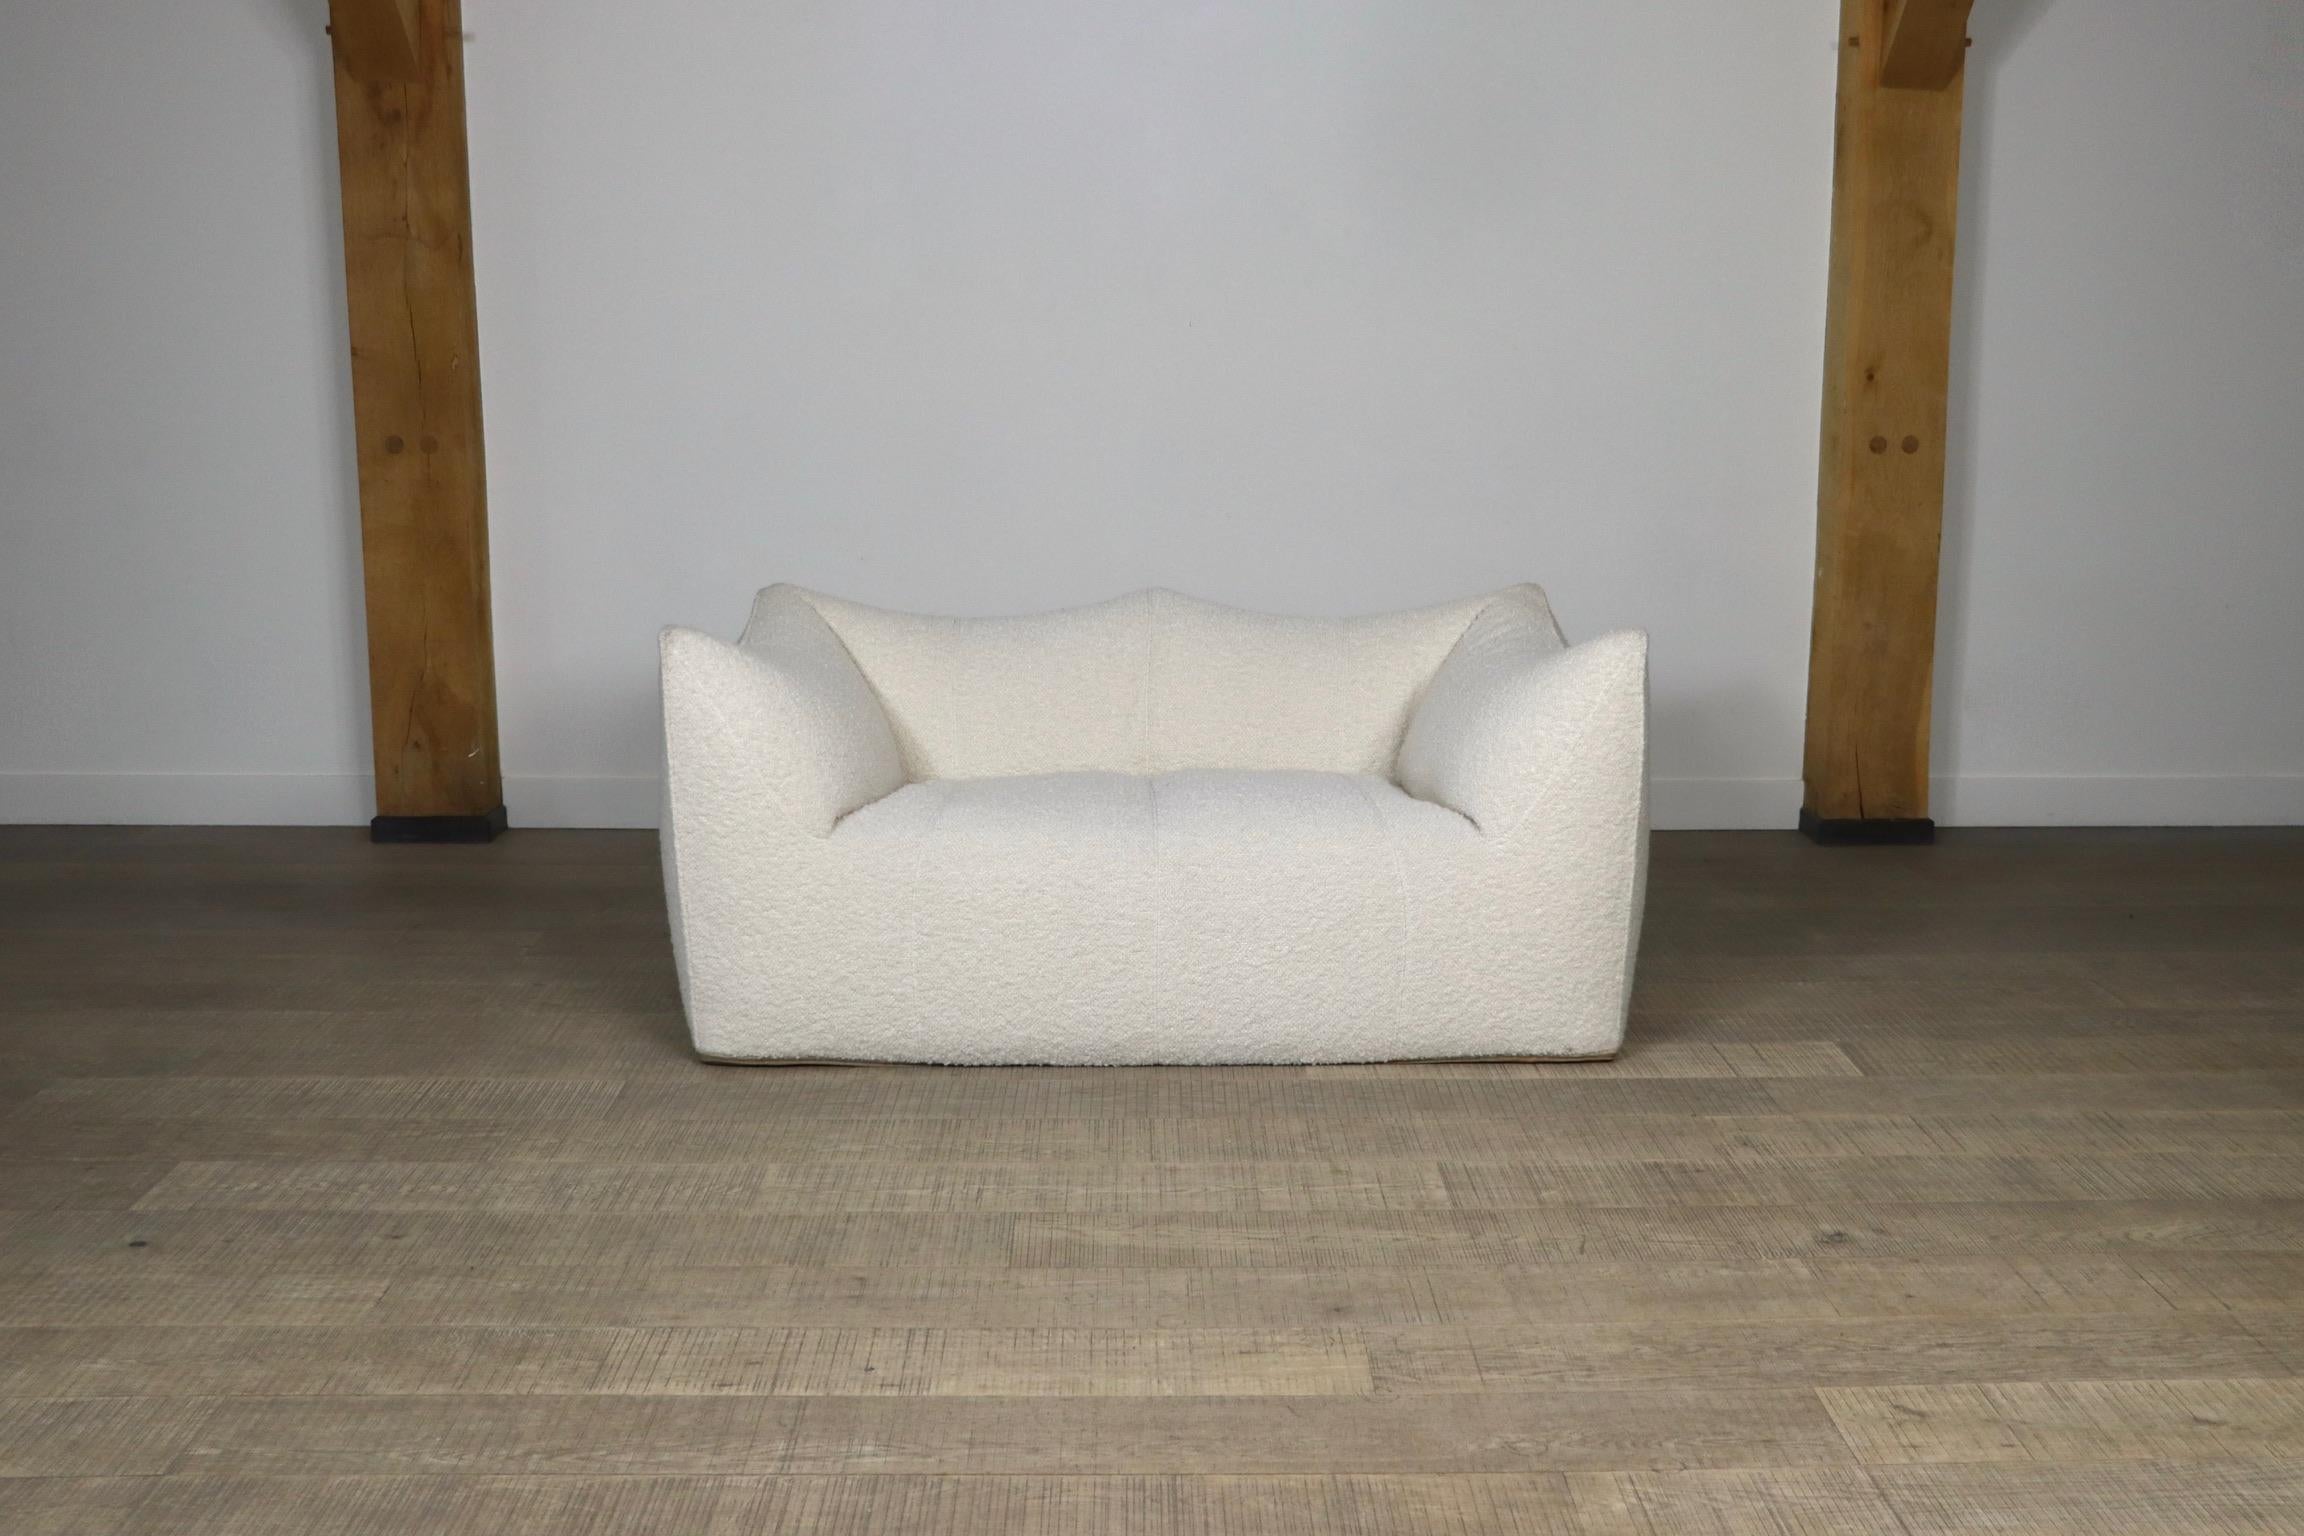 Stunning “Le Bambole” two seater sofa in high quality cream bouclé designed by Mario Bellini for B & B Italia in the 1970s. Besides the outstanding comfort this iconic sofa is famous for its timeless looks. The design was awarded the 1979 'Compasso